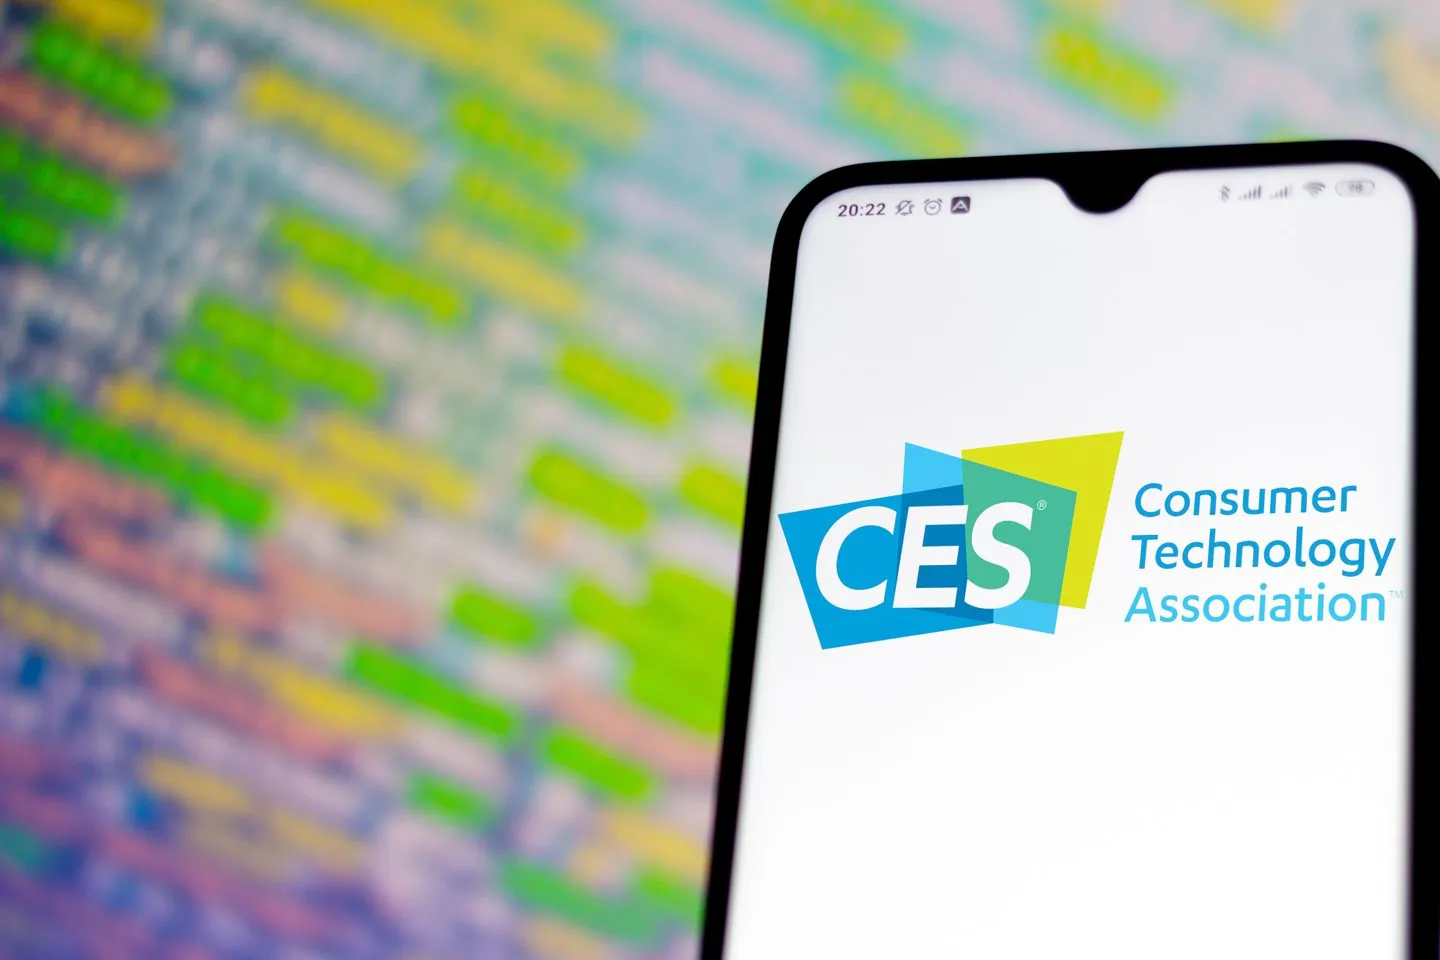 Best Of CES 2021 Technologies in Pandemic Situation